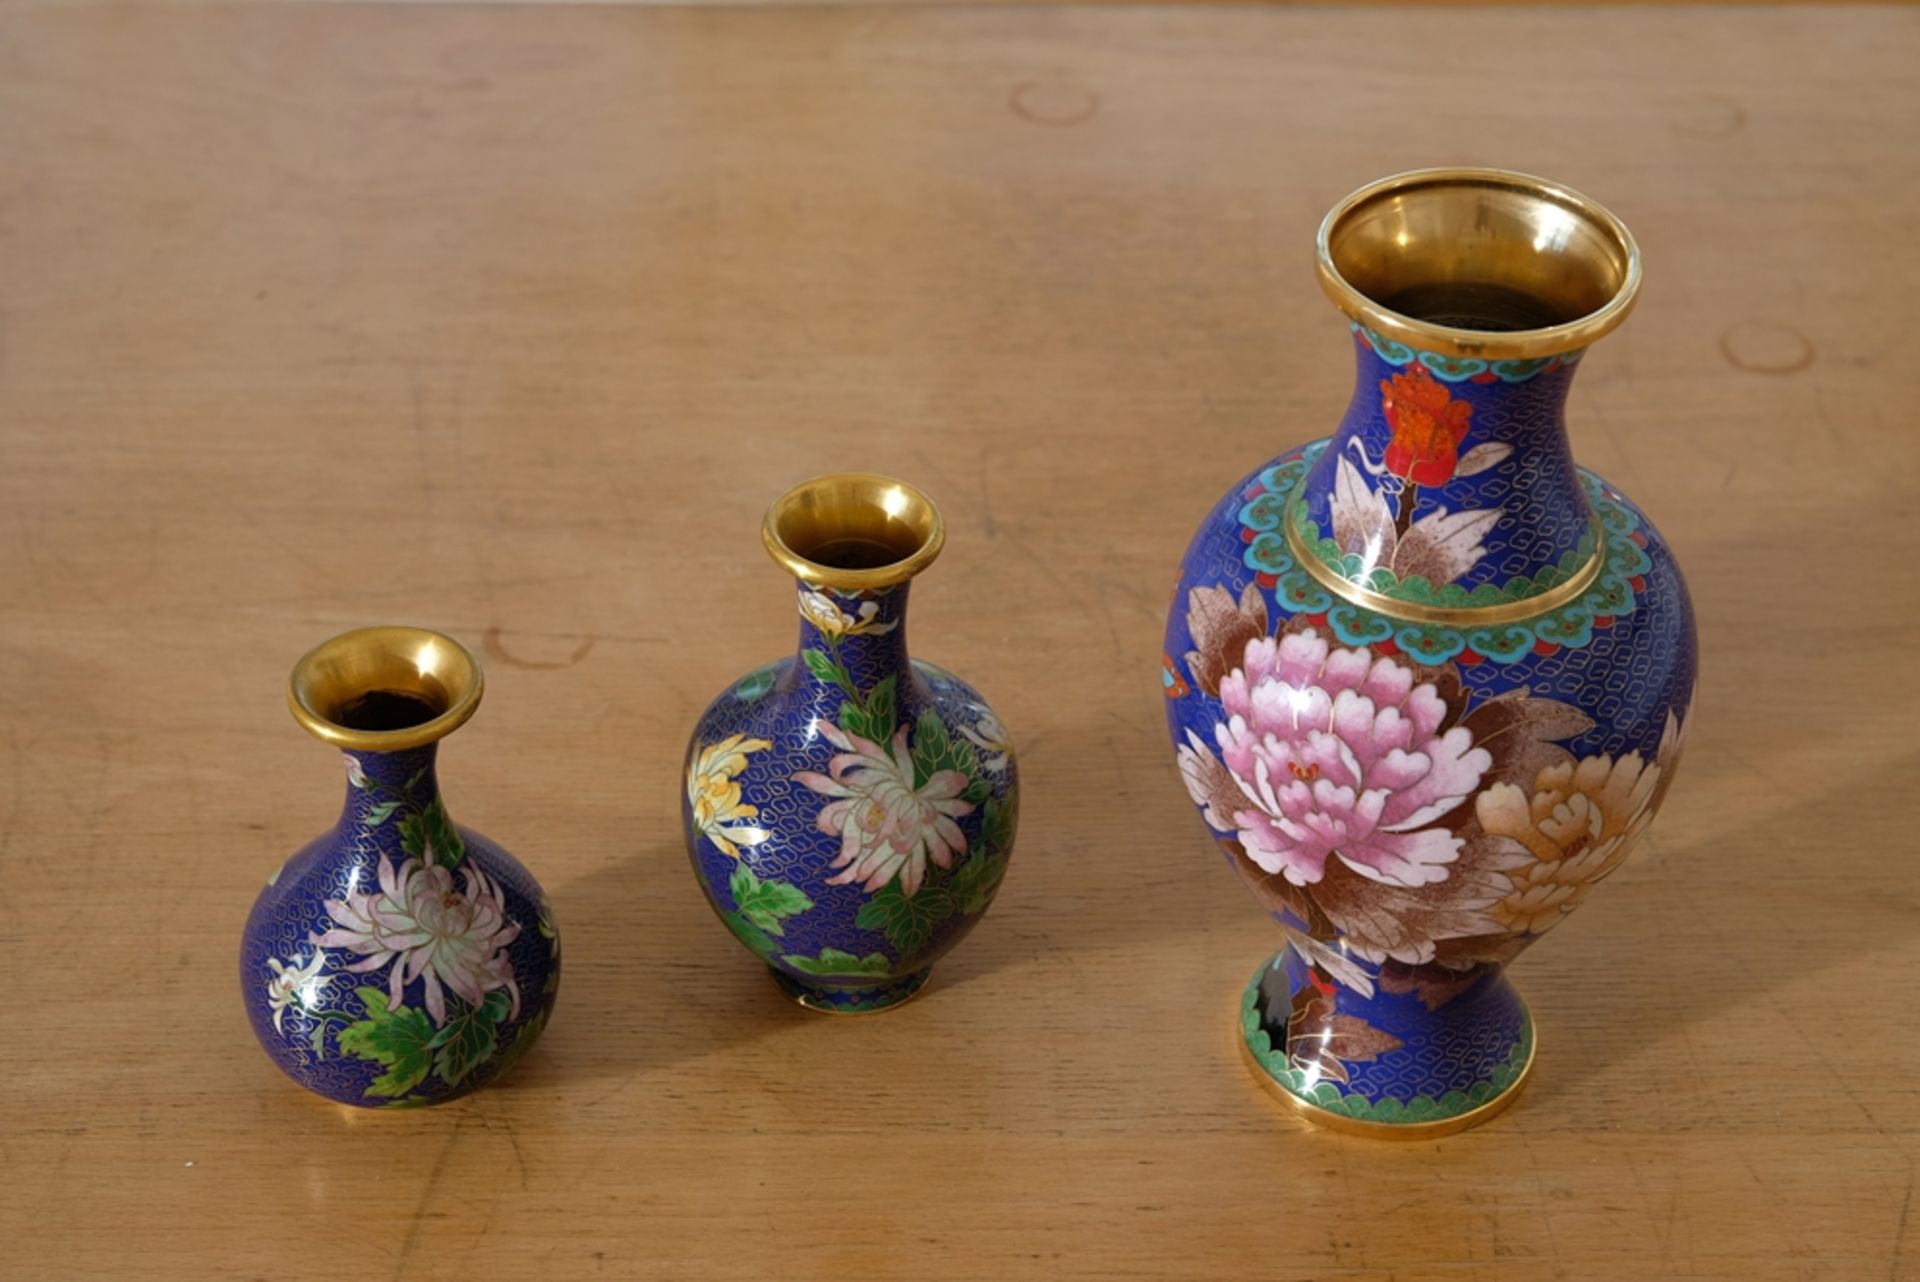 Japanese cloisonné vases, three blue enamel vases. Decorated with floral motifs. Gilt interior, gol - Image 2 of 3